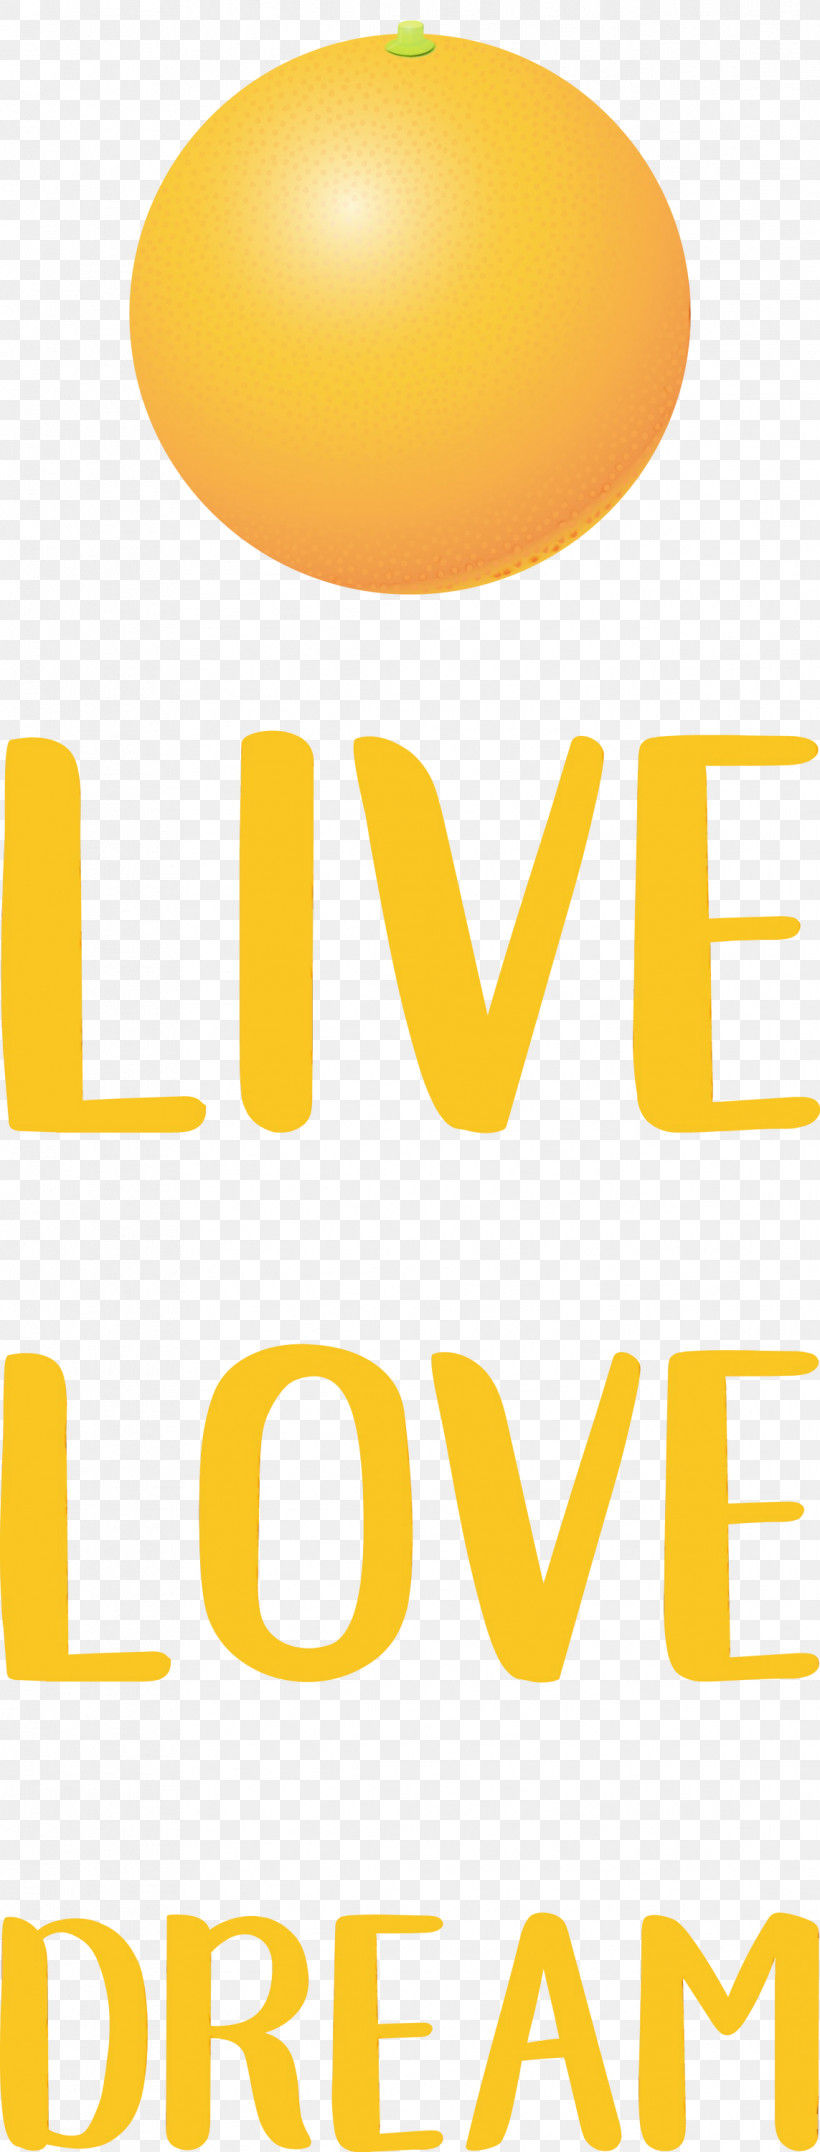 Yellow Line Meter Mathematics Geometry, PNG, 1143x3000px, Live, Dream, Geometry, Line, Love Download Free